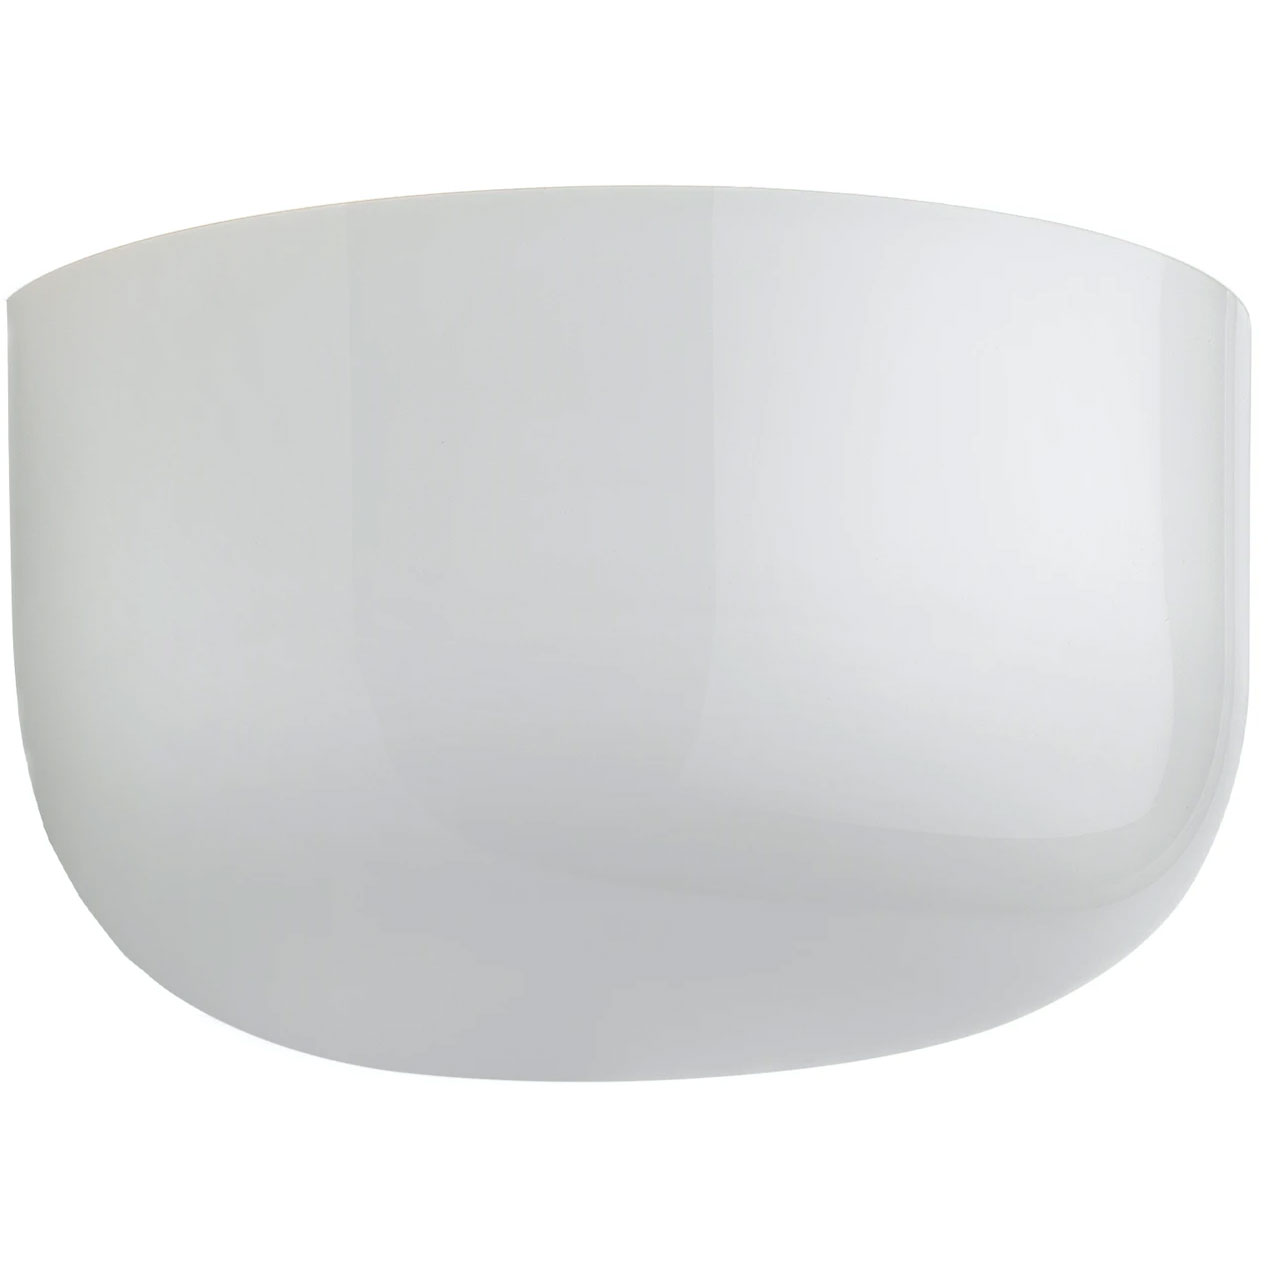 Bellhop Wall Up Wall Lamp, White